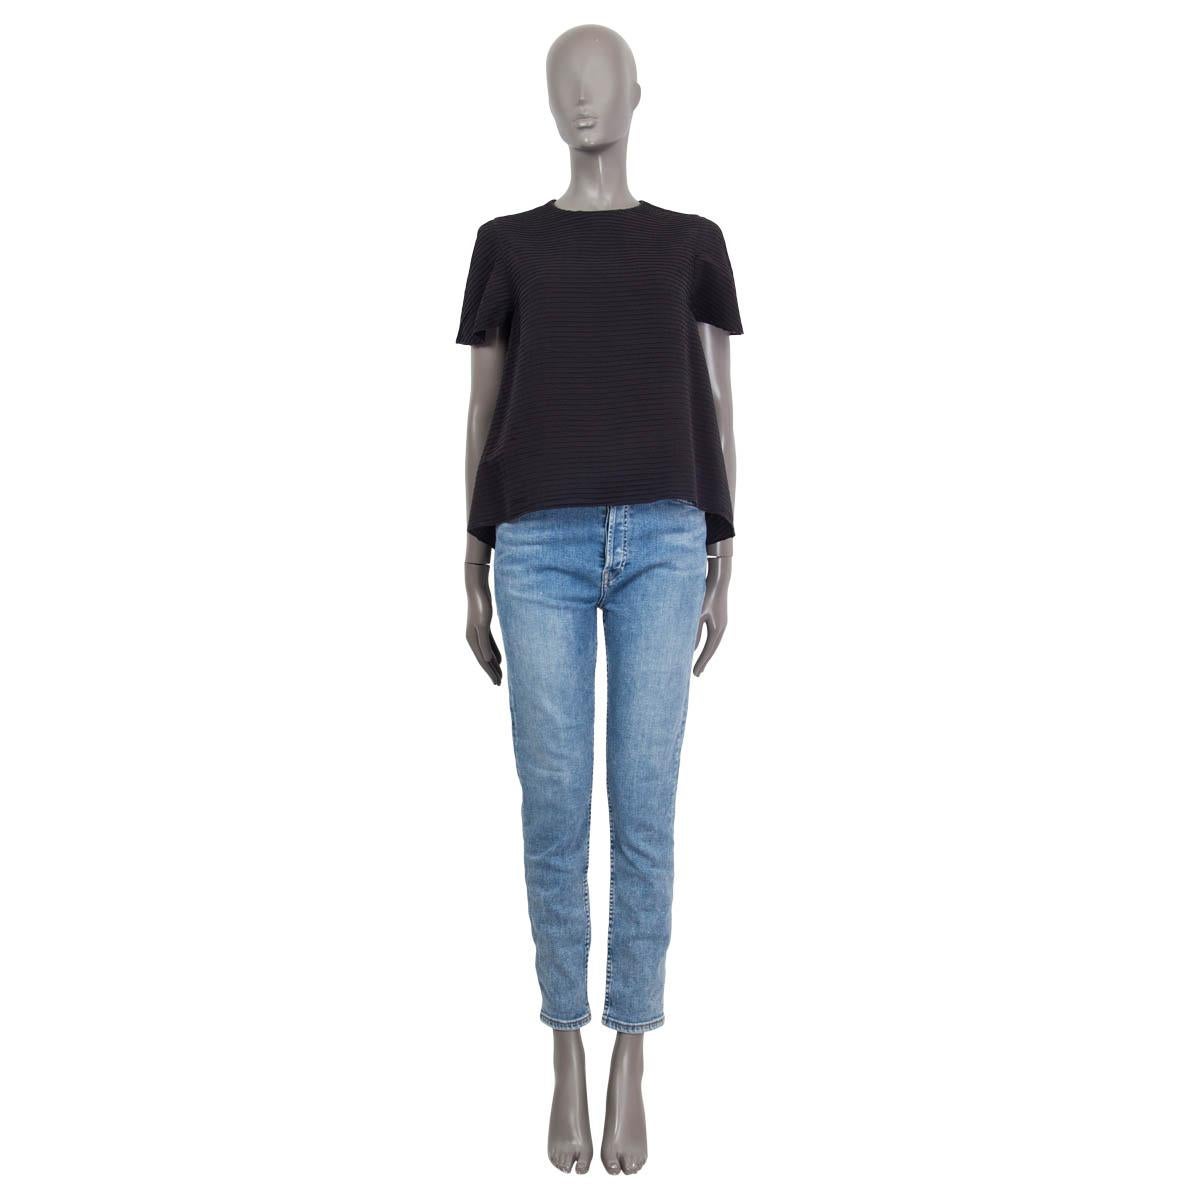 100% authentic Balenciaga structured flared blouse in charcoal silk (94%) and elastane (6%). Has short sleeves and opens with a concealed zipper and a hook at the back. Lined in charcoal silk (94%) and elastane (6%). Has been worn and is in